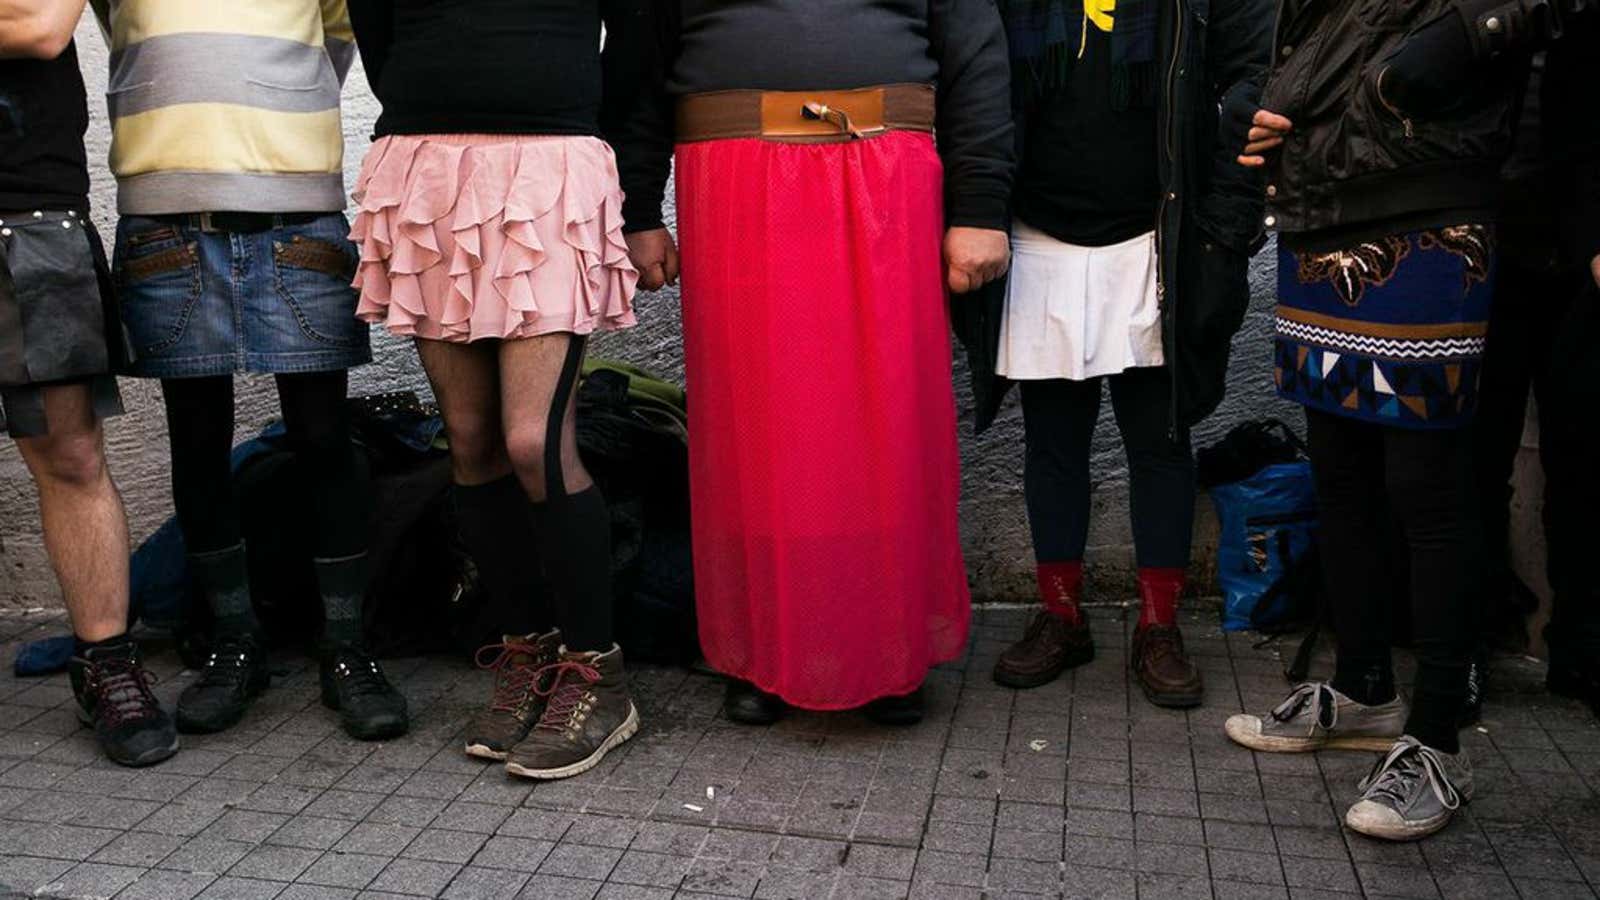 Turkish men protesting in skirts on Feb. 21 in Istanbul, Turkey.